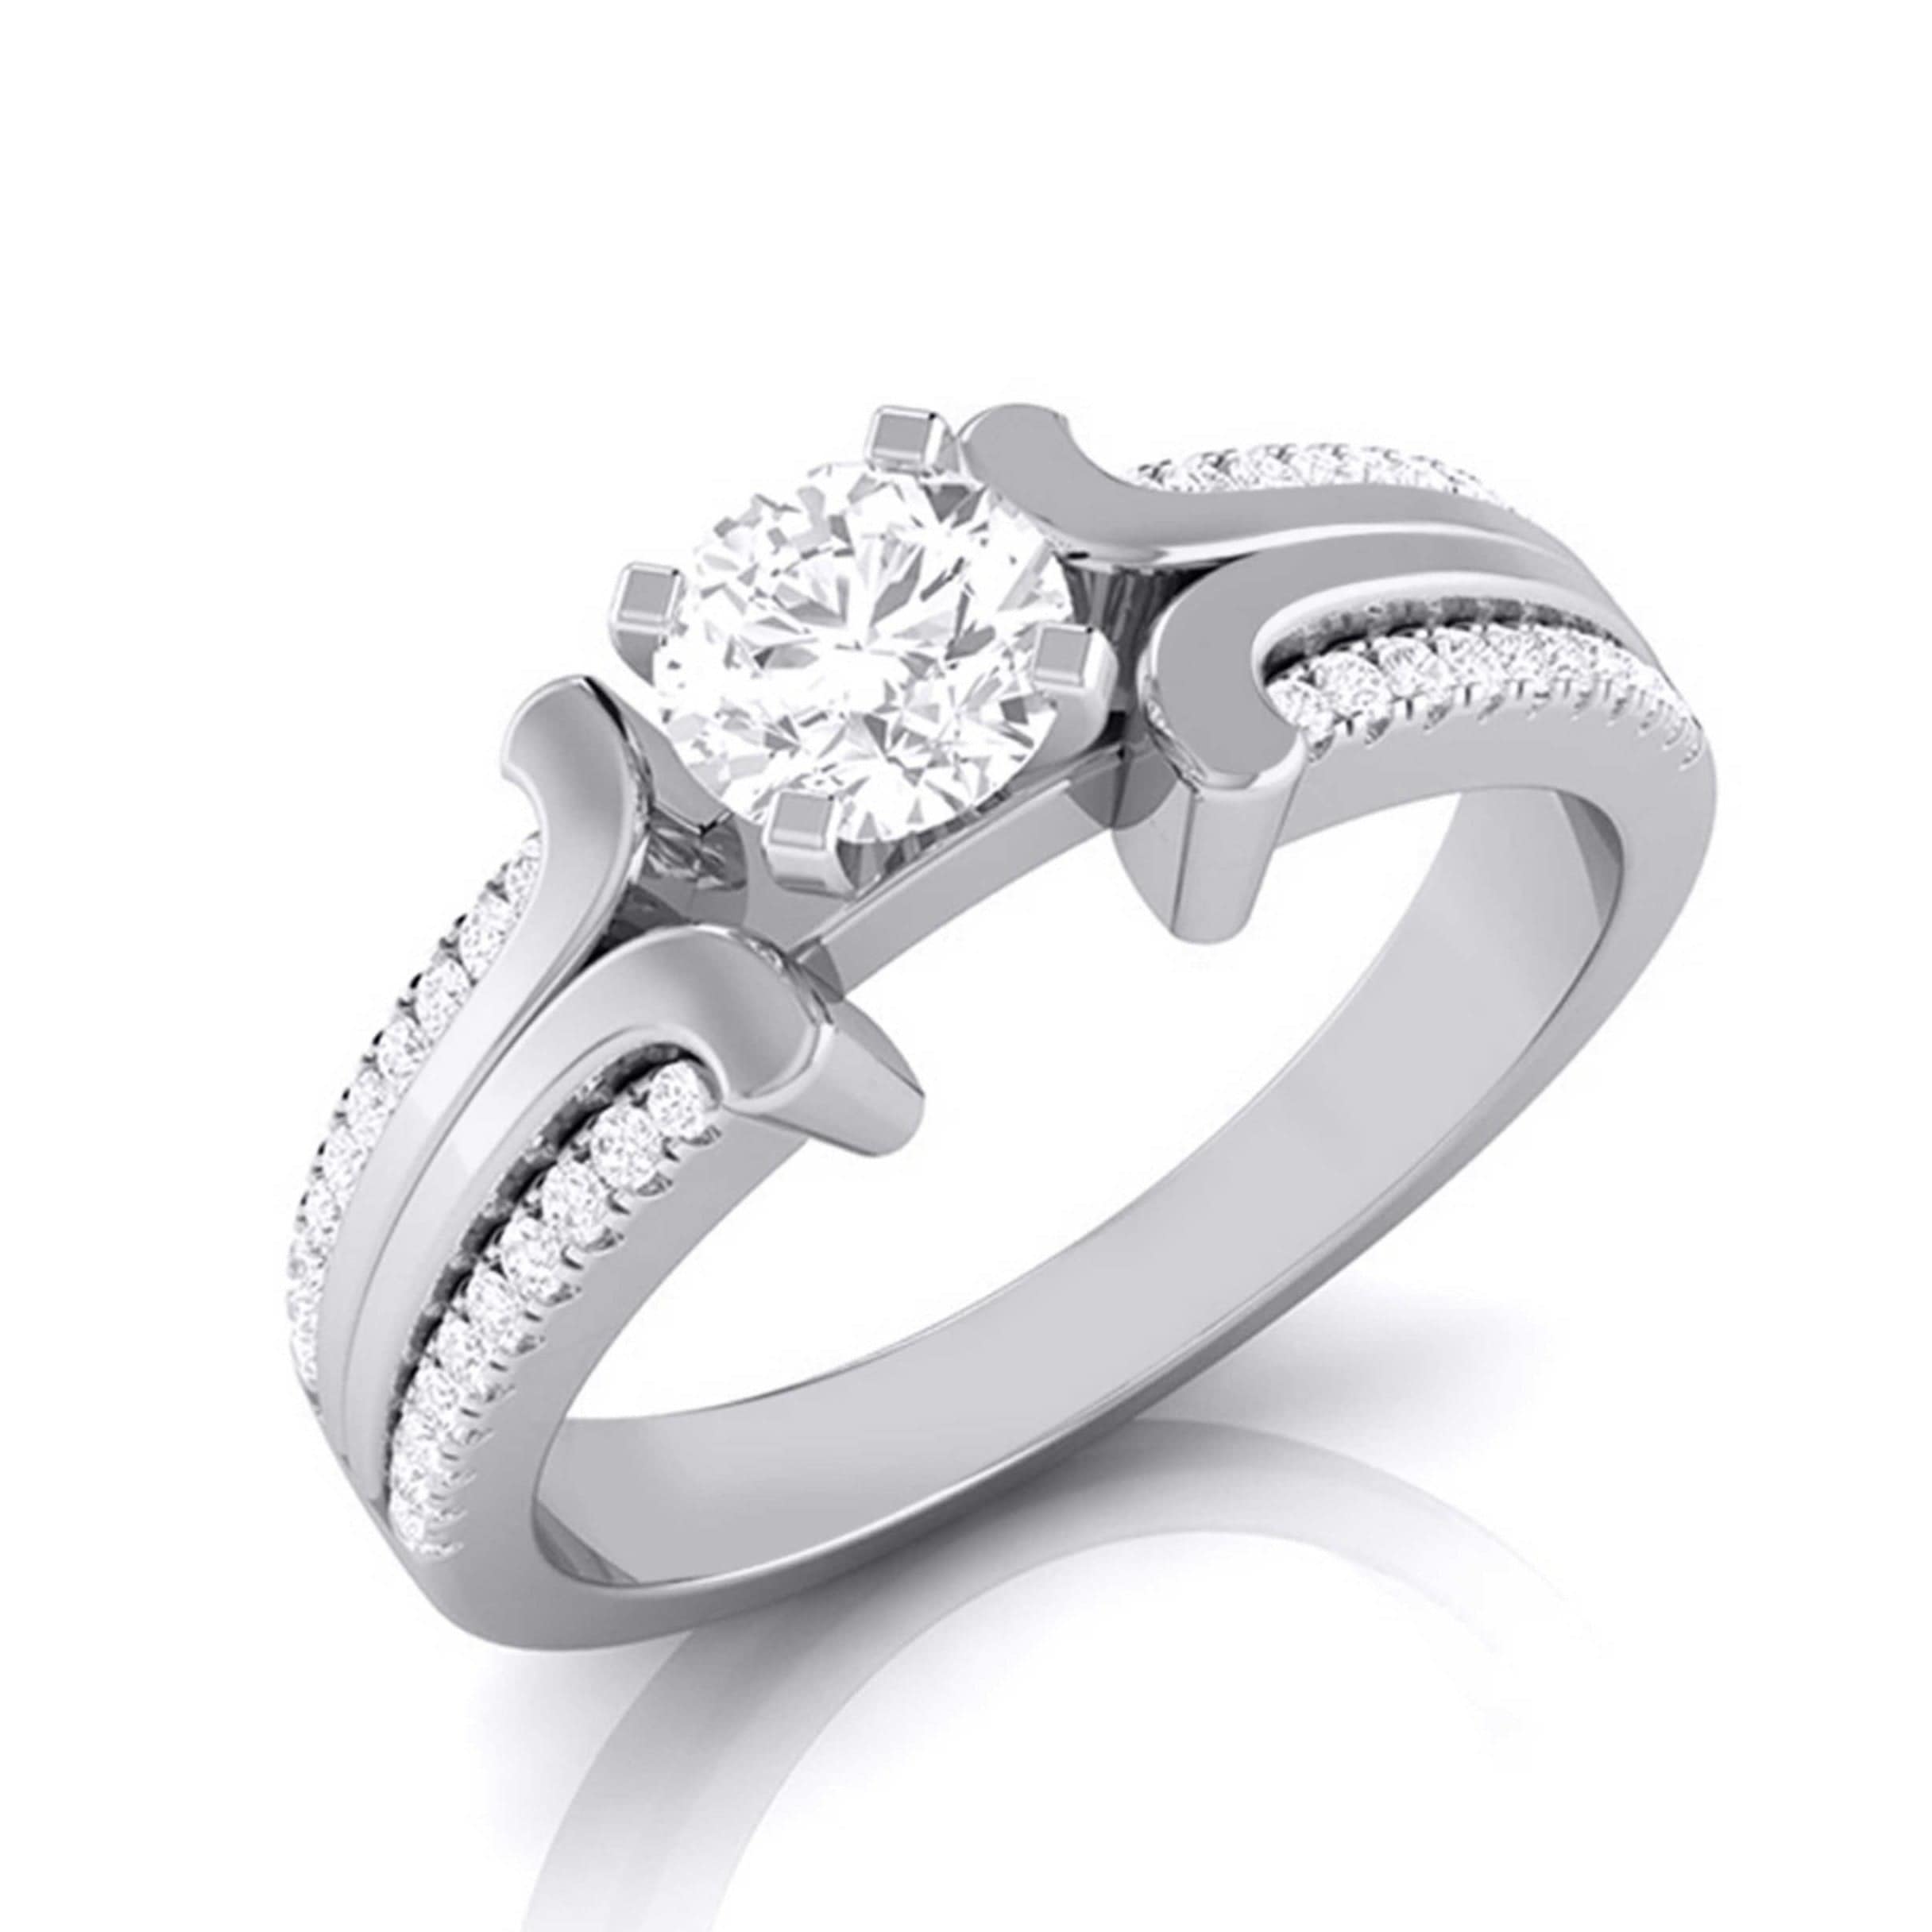 The Monarch Solitaire Diamond Ring-Candere by Kalyan Jewellers